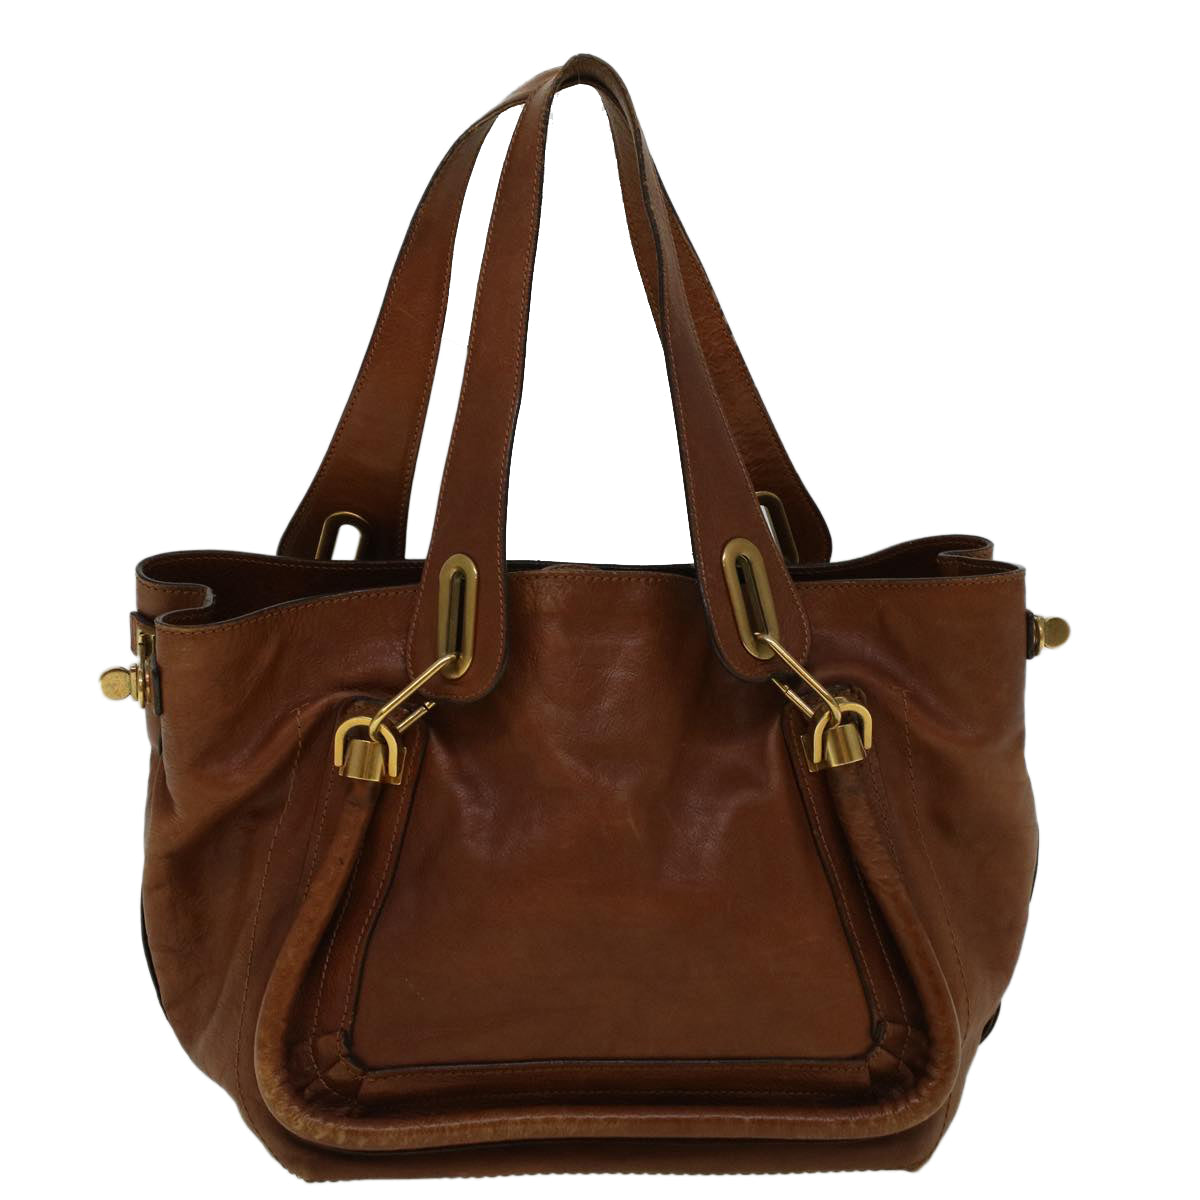 Chloe Paraty Shoulder Bag Leather Brown Auth bs9254